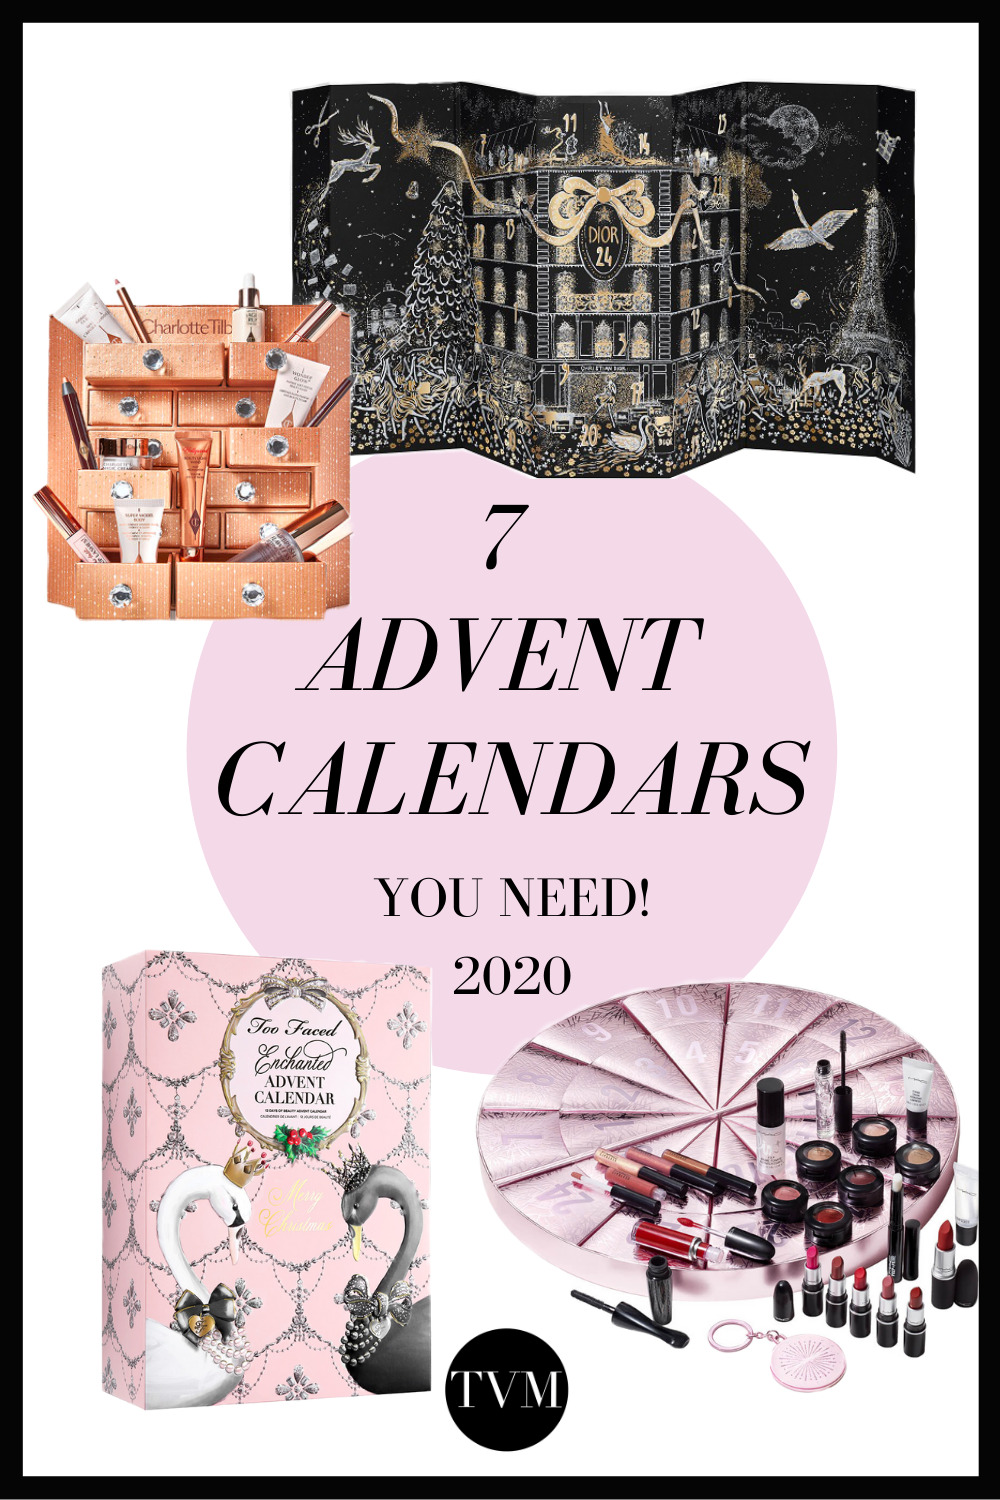 I know we are still in November but some advent calendars are already sold out! Here you will find the top 7 beauty advent calendars- 2020 edition! A must-have for this season! Plus - the perfect gift for a beauty lover! 